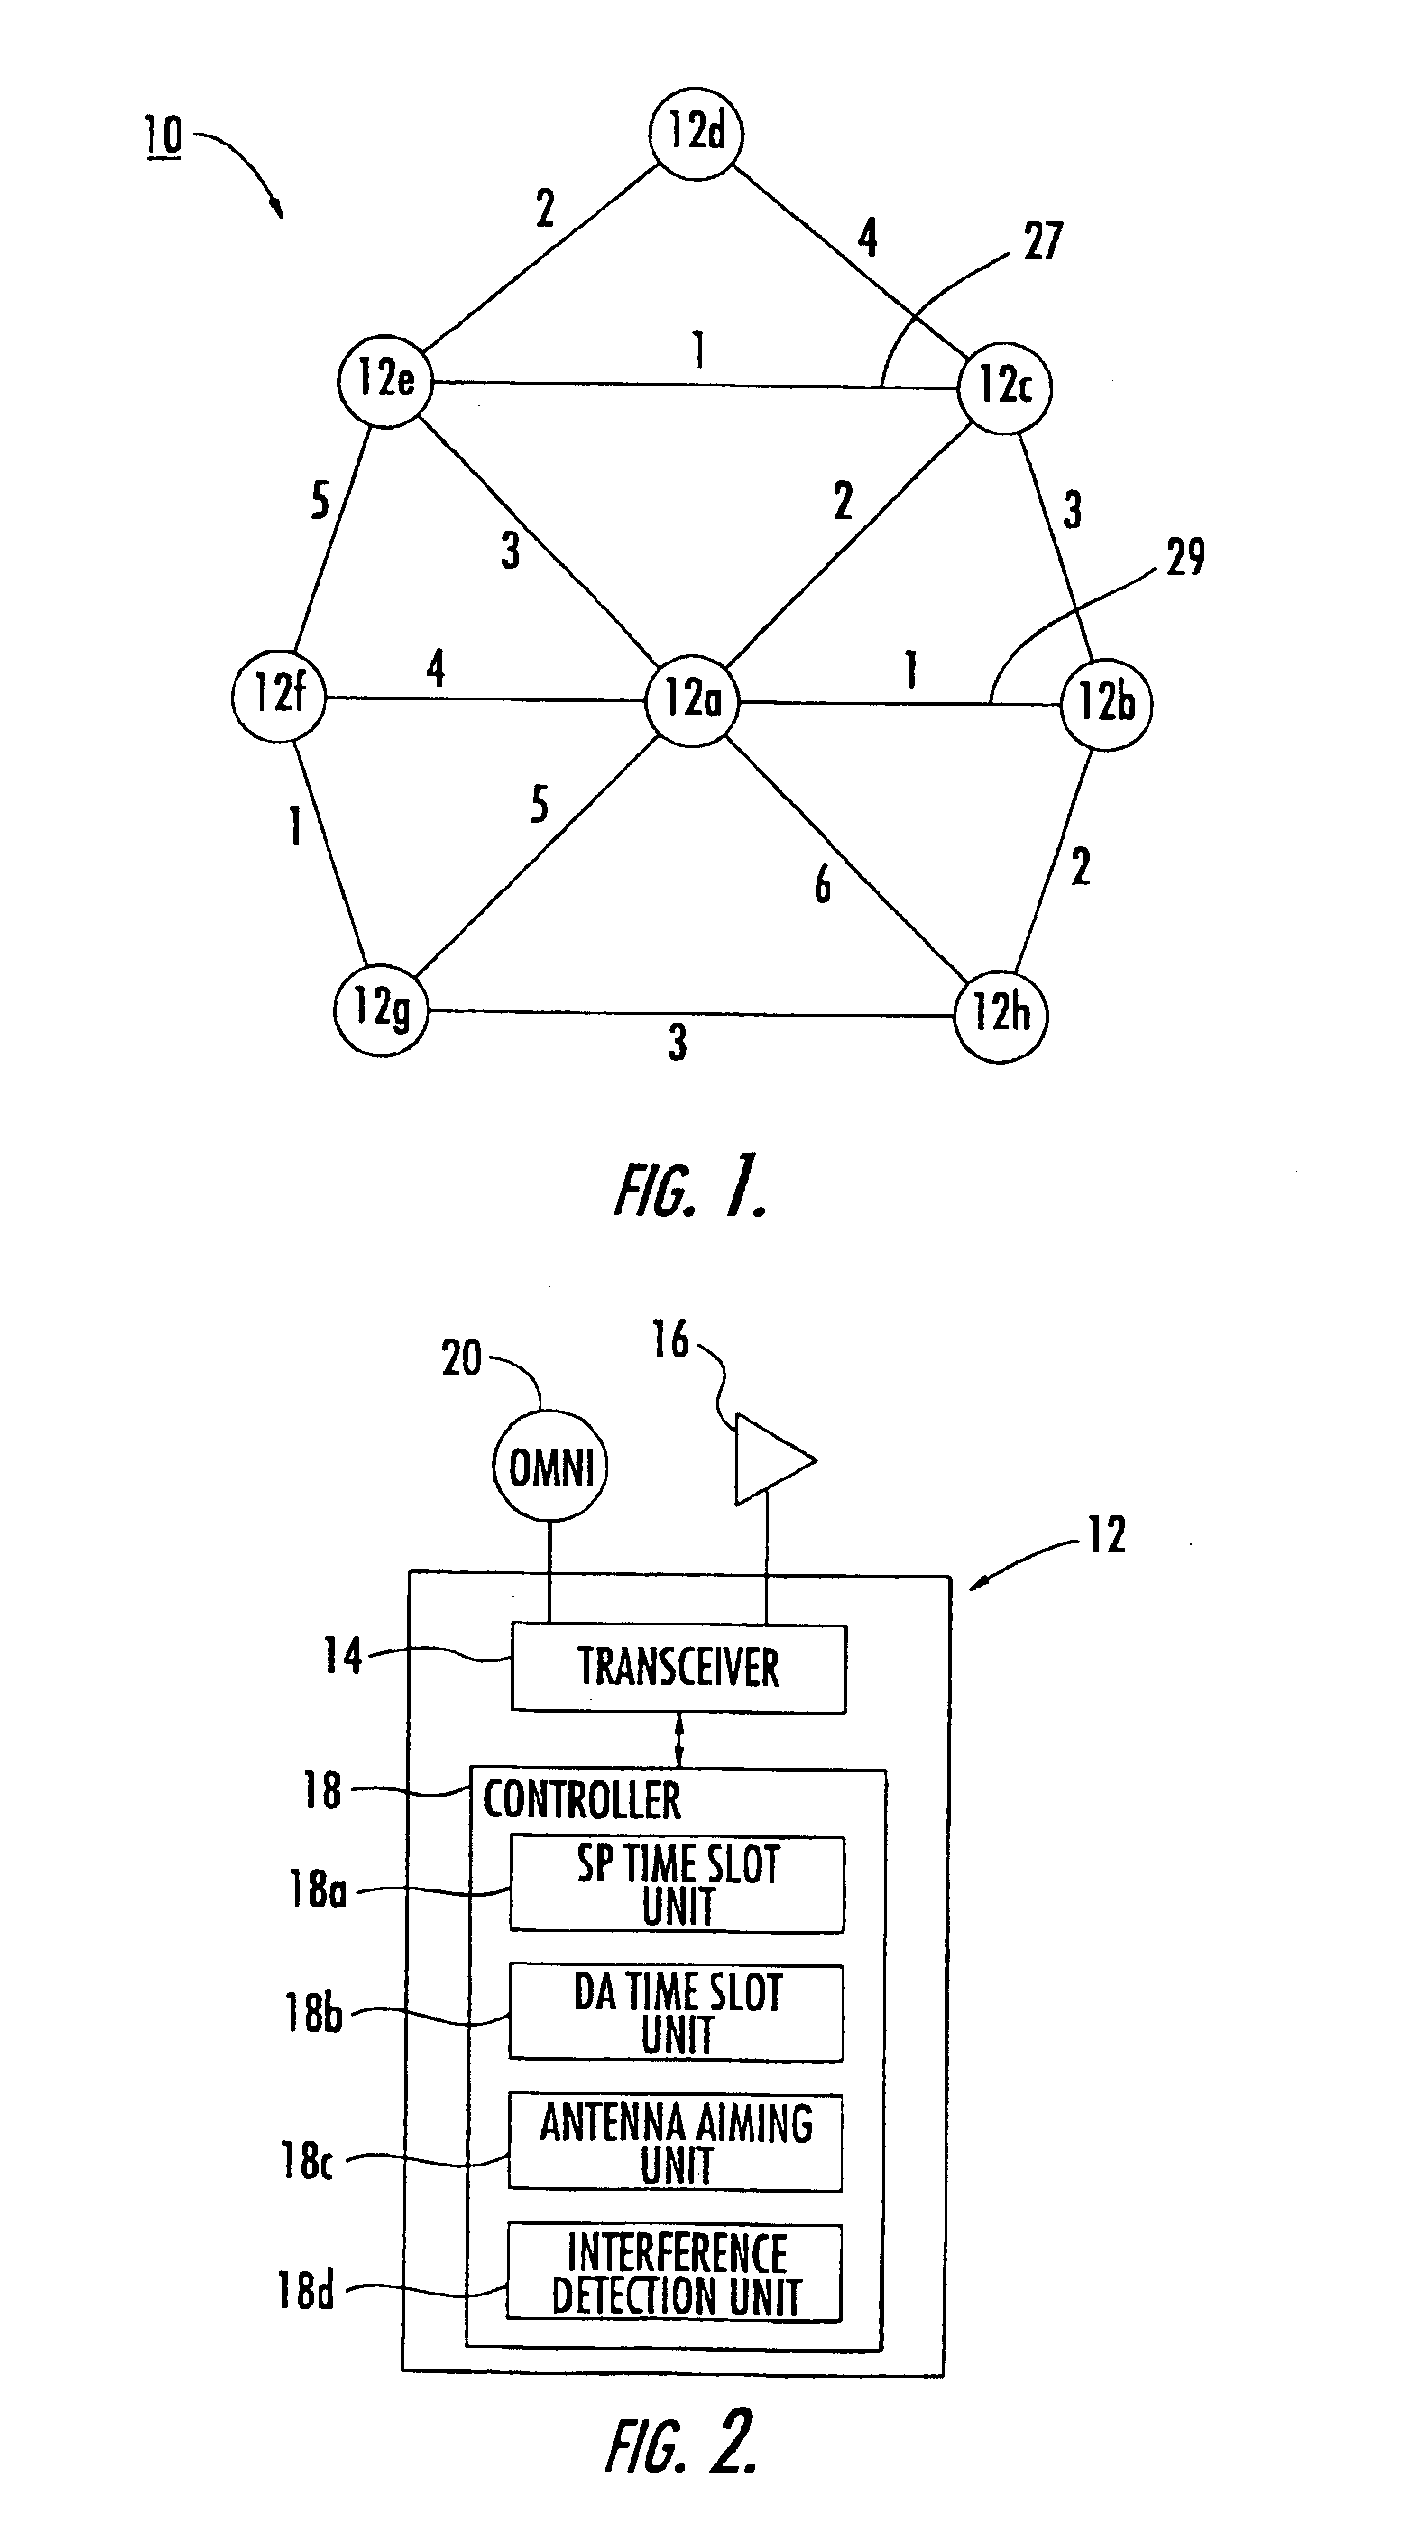 Method and device for establishing communication links and detecting interference between mobile nodes in a communication system